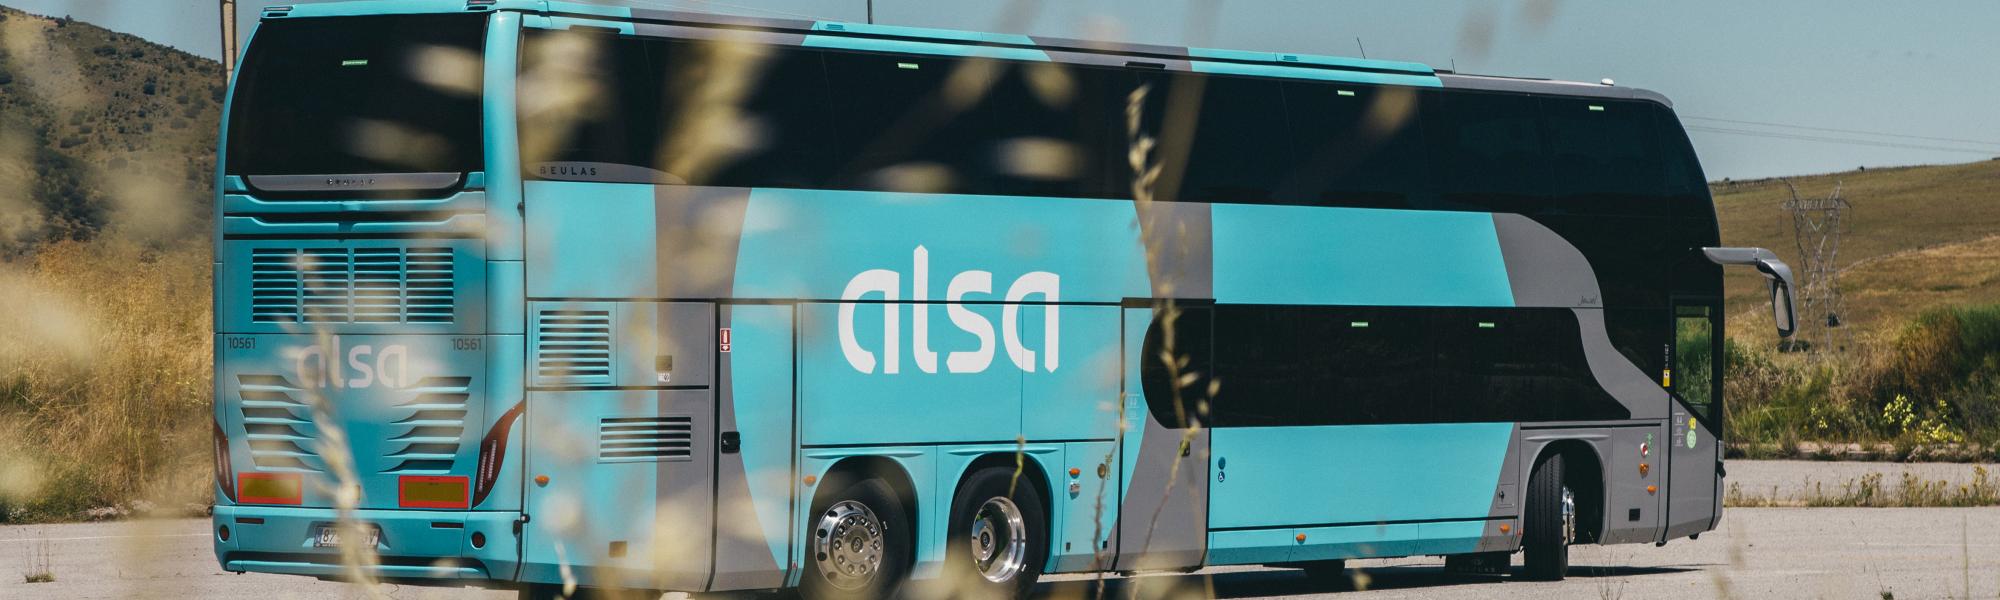 ALSA: Embracing new fuel technologies to decarbonise by 2035